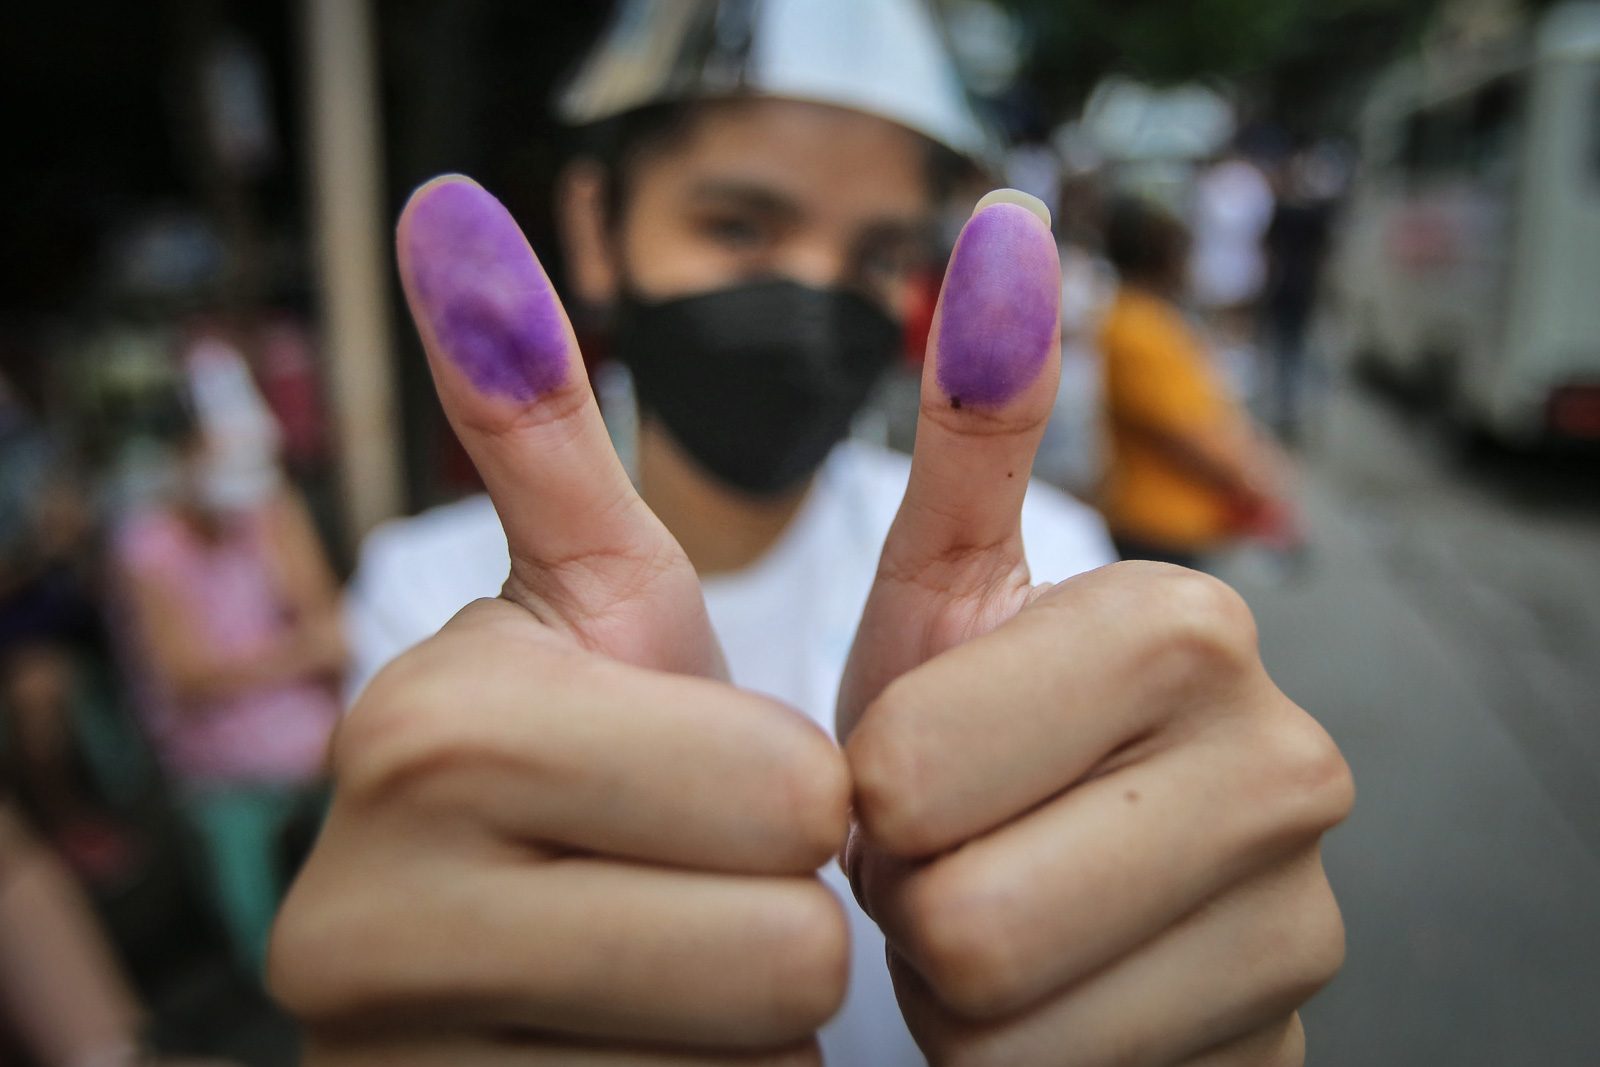 Youth coalition tells young Filipinos to vote candidates ‘who care about us’